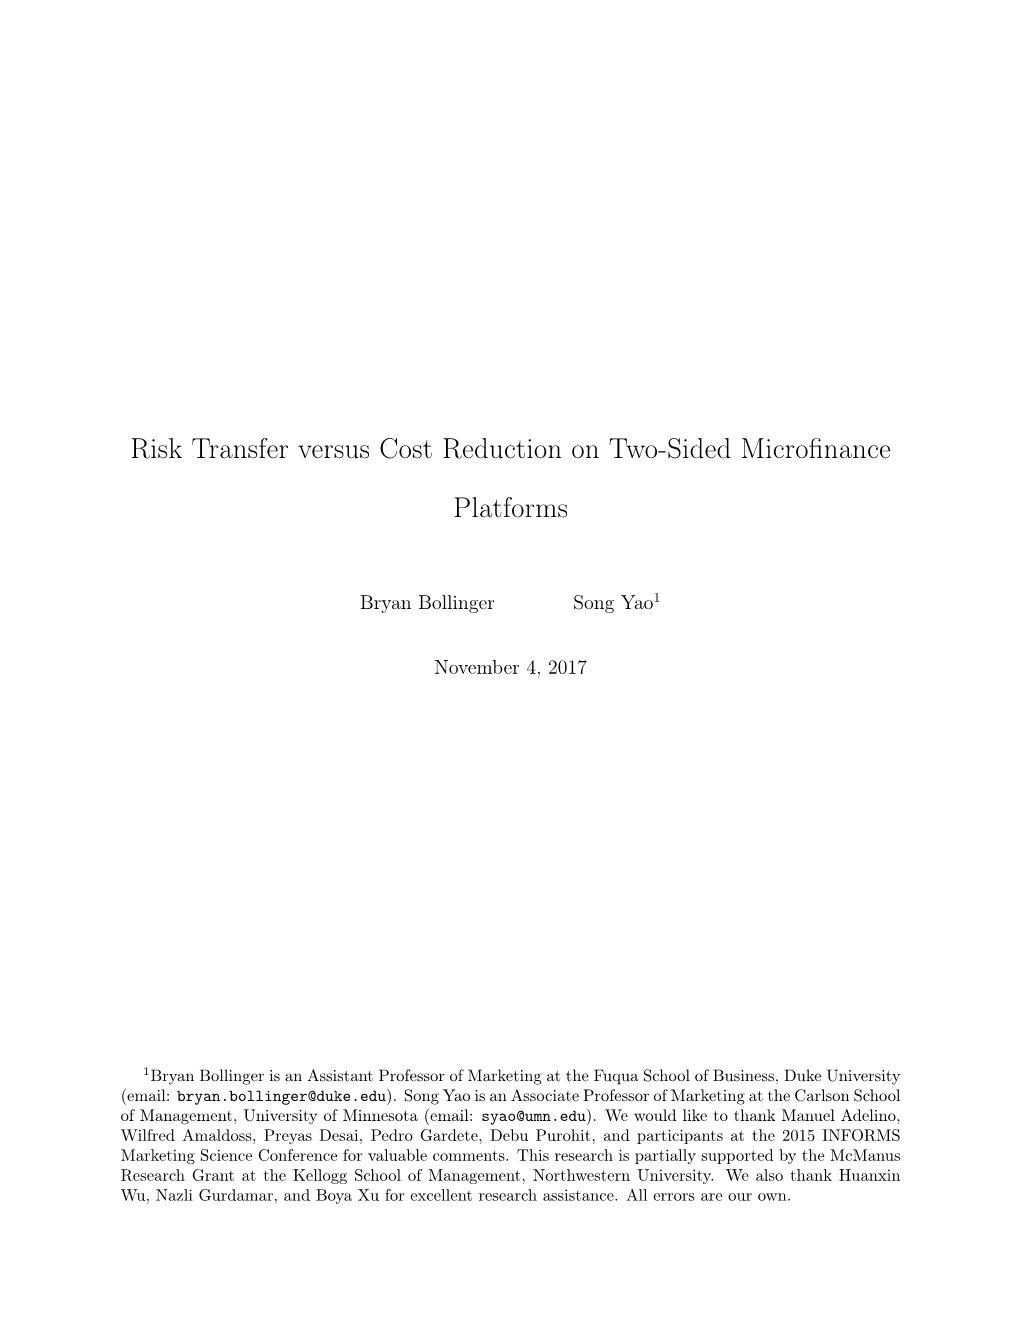 Risk Transfer Versus Cost Reduction on Two-Sided Microfinance Platforms